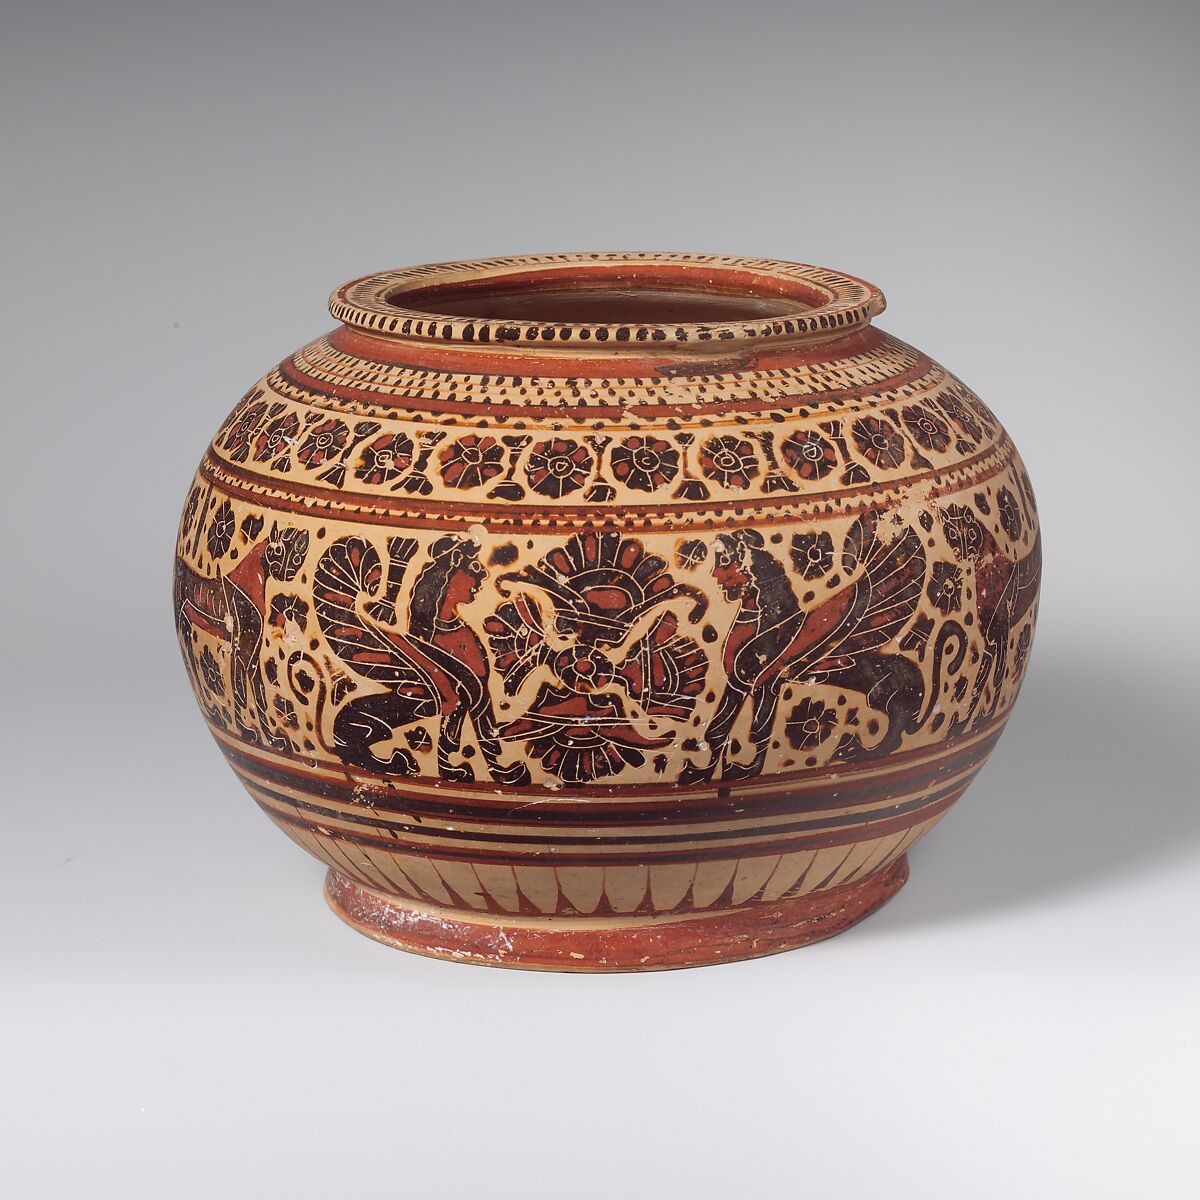 Terracotta pyxis (box), Attributed to the Canessa Painter, Terracotta, Greek, Corinthian 